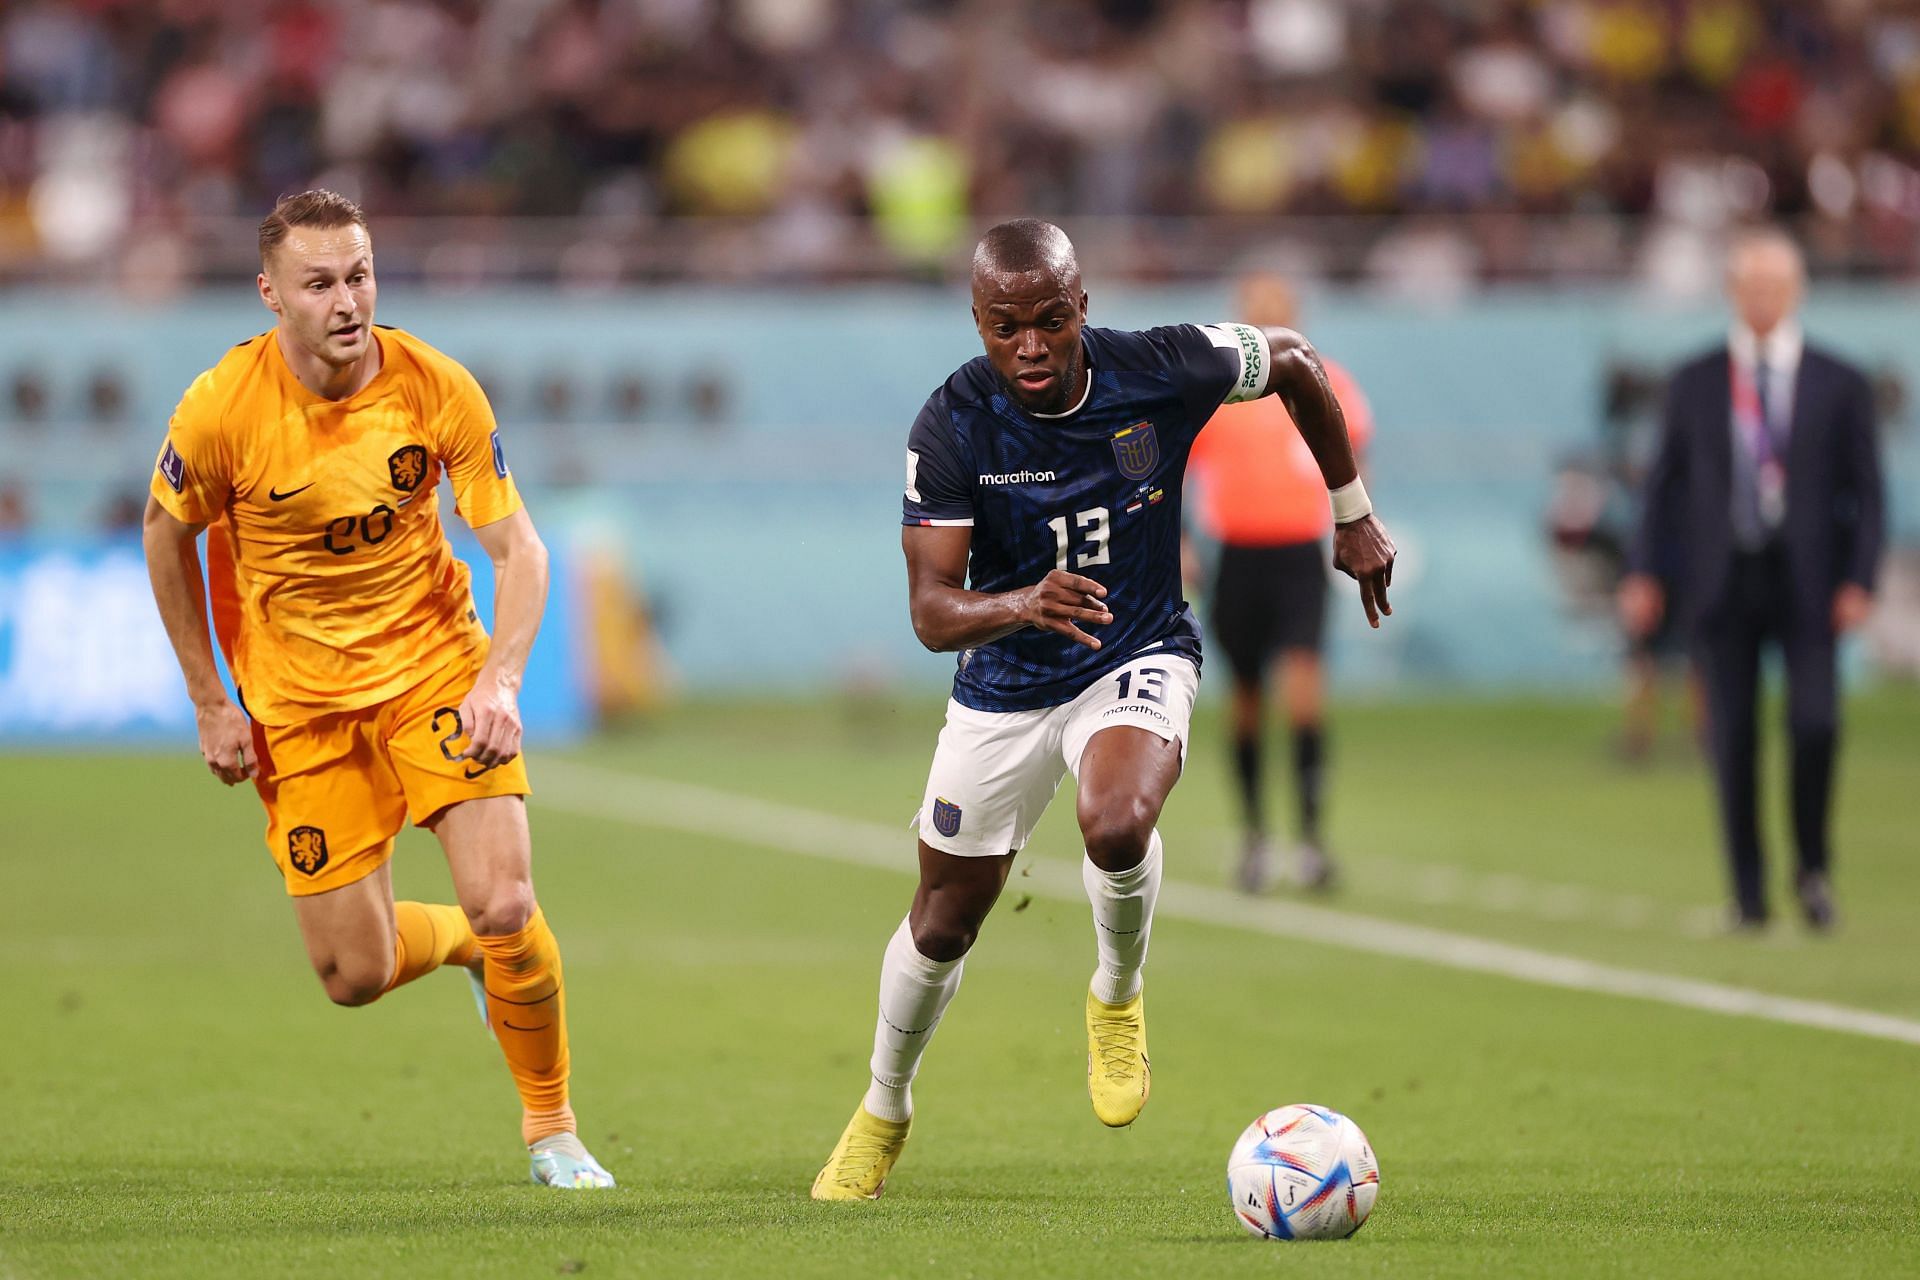 Enner Valencia controls the ball under pressure from Teun Koopmeiners.